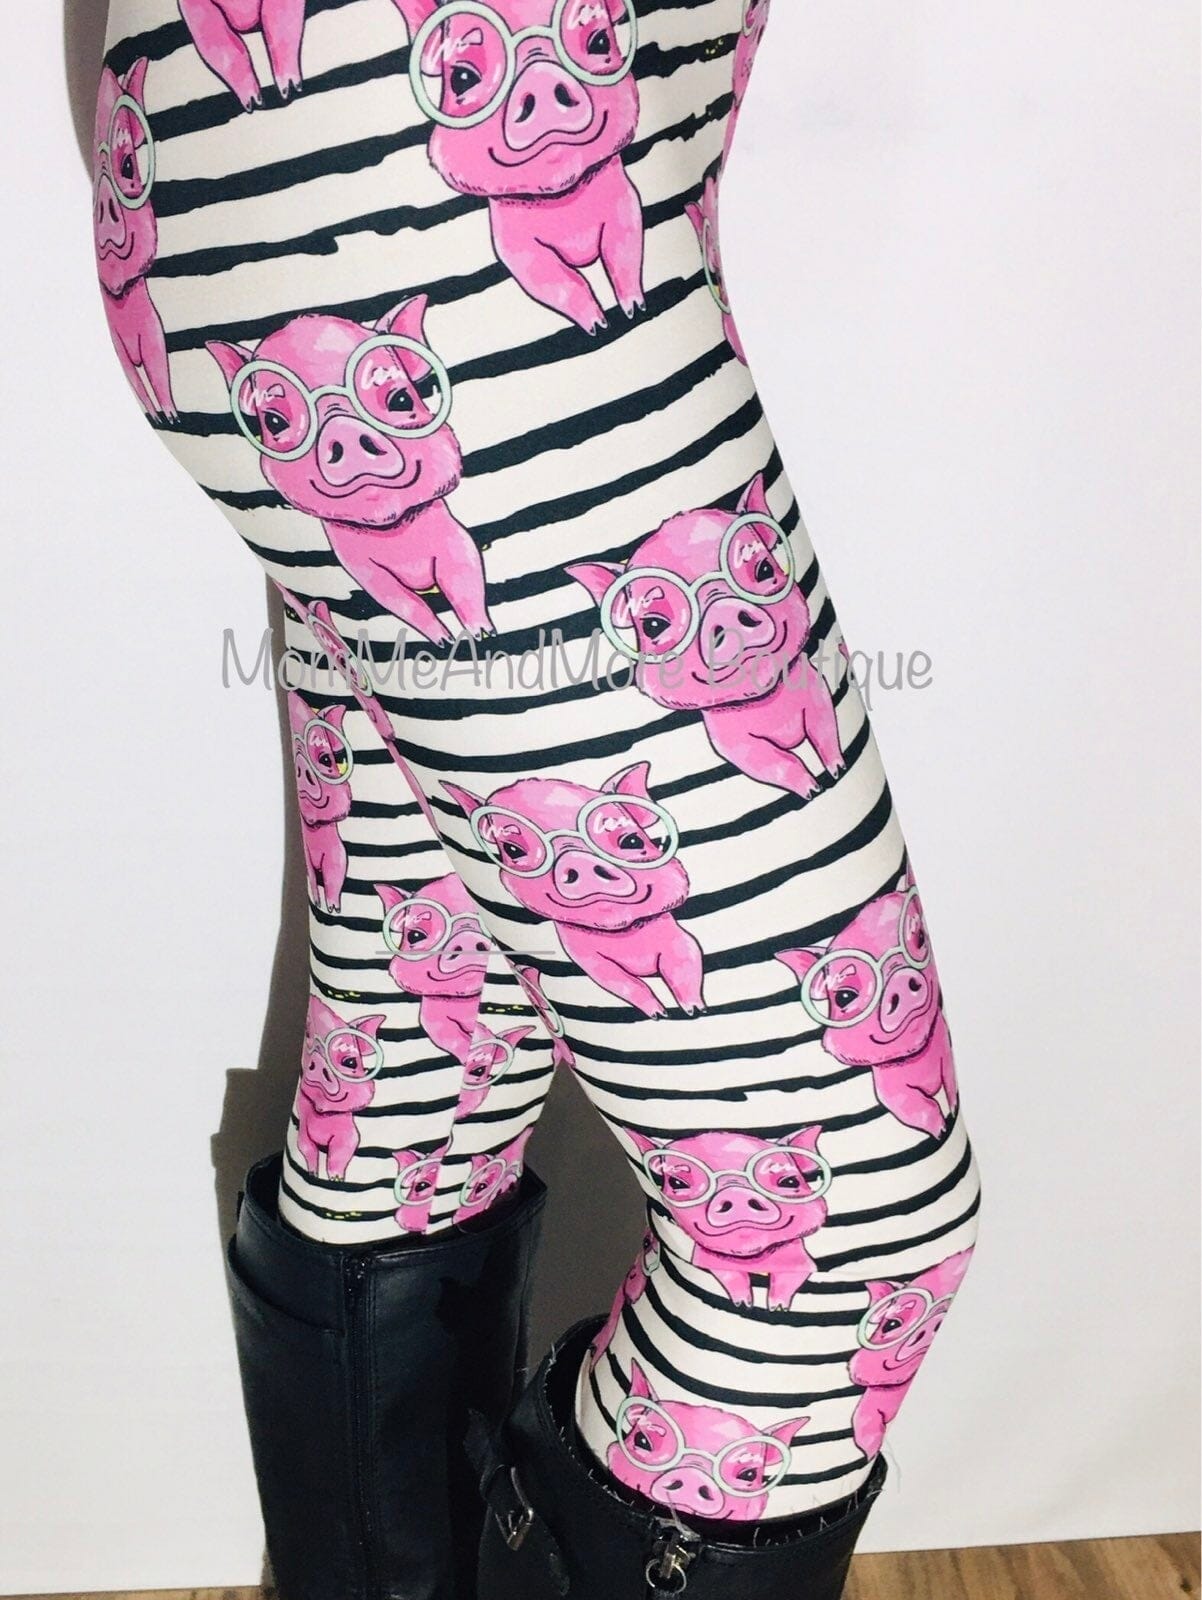 Womens Leggings | Exclusive Pink Pig Leggings | Yoga Pants | Footless Tights | Yoga Waistband Leggings MomMe and More 